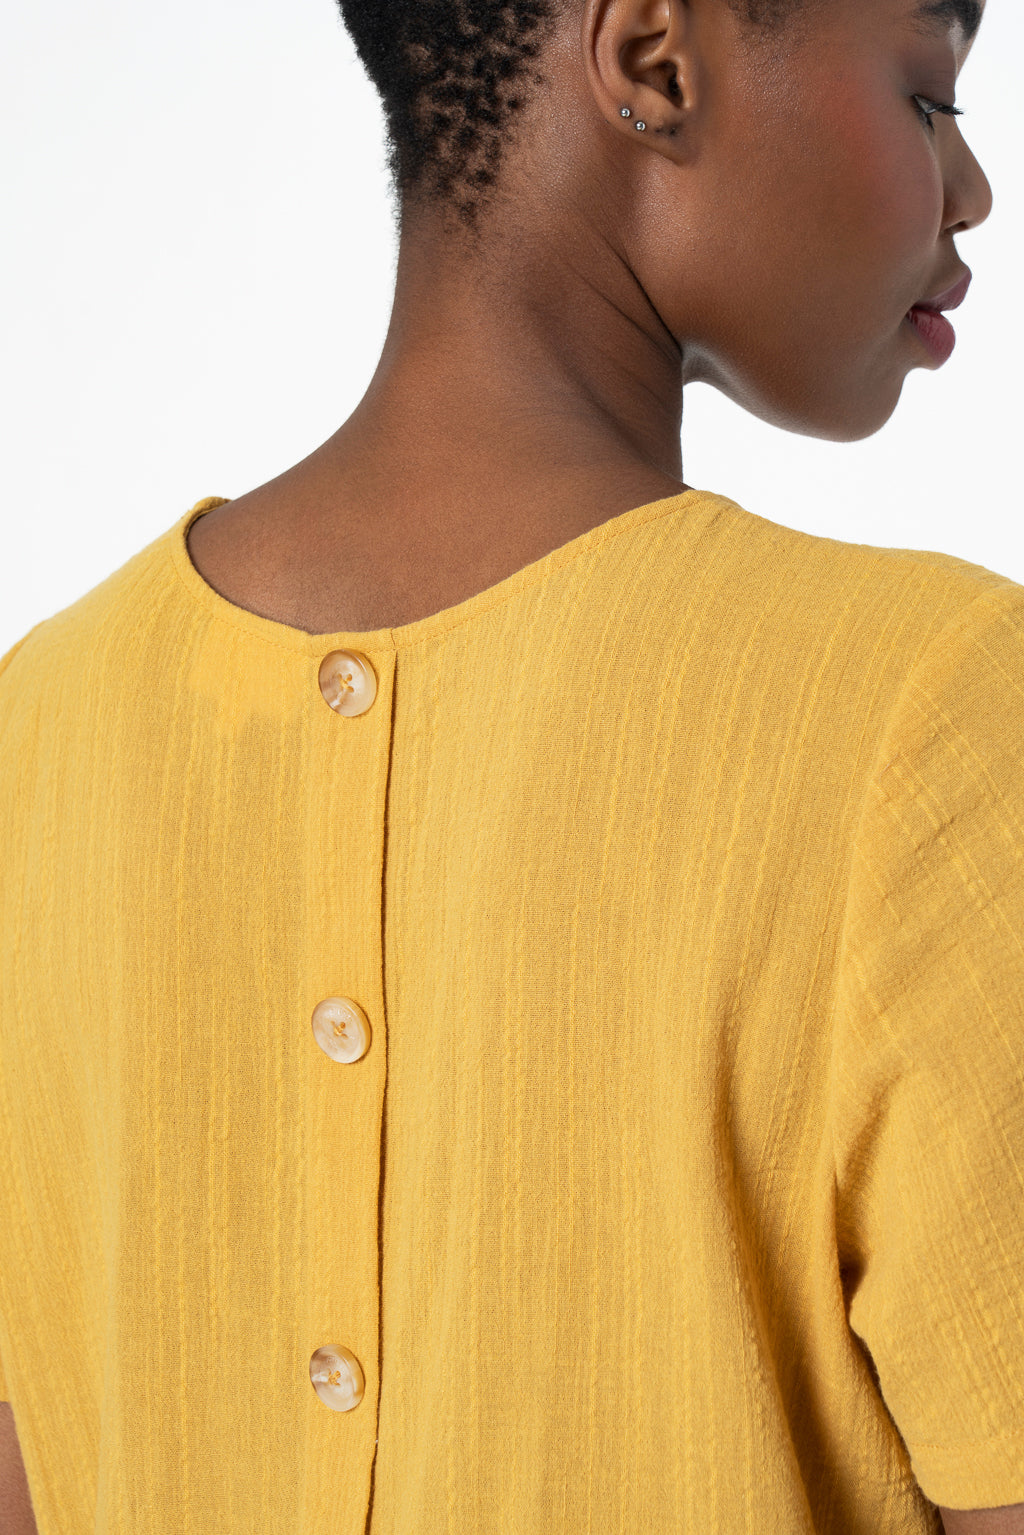 Boxy Textured Top _ 143364 _ Yellow